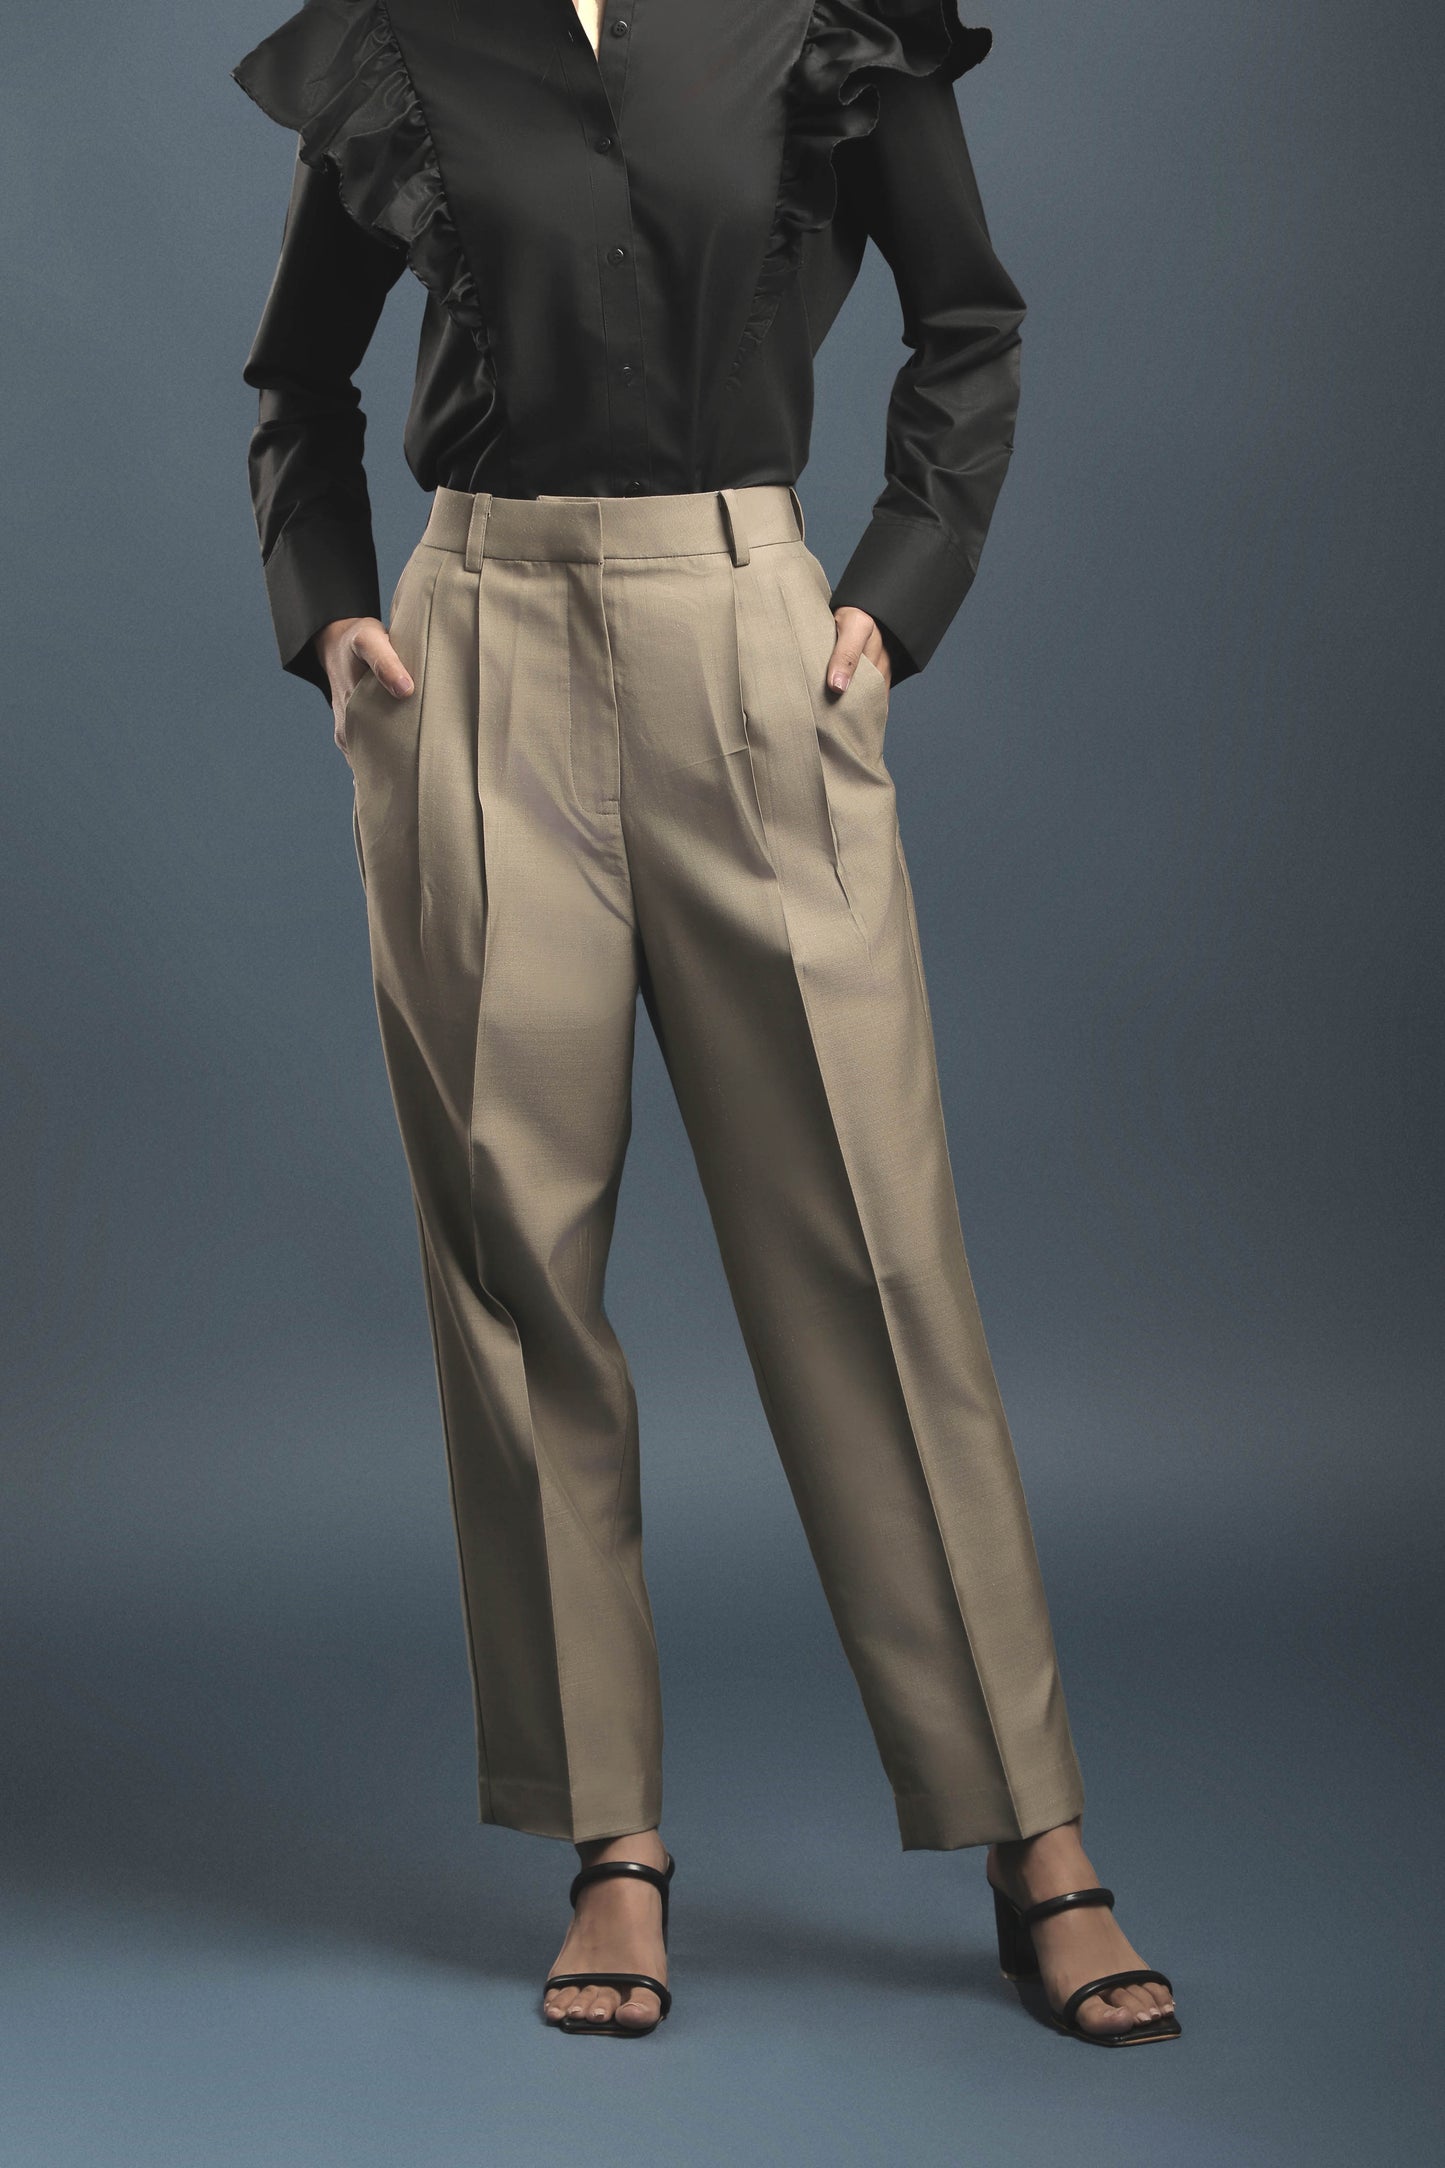 Black Frill Shirt & Beige Double Pleated Trouser Combo